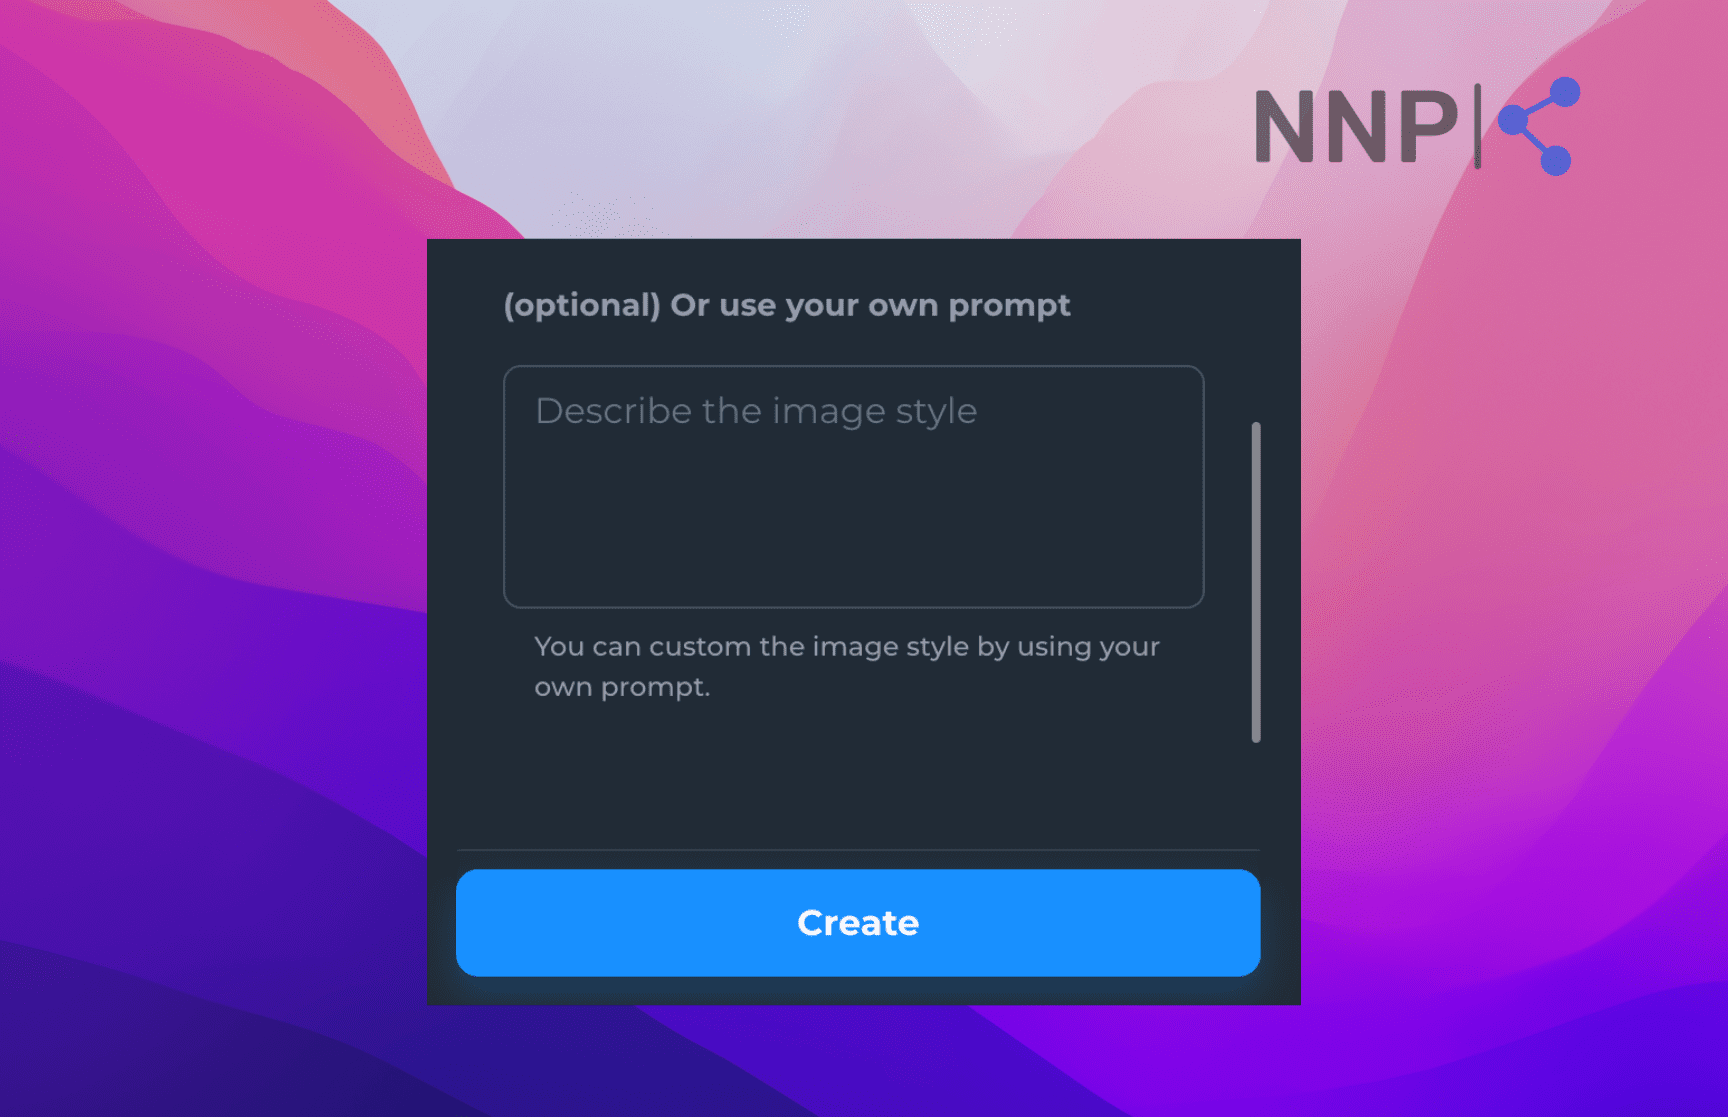 Enter prompt and click on the 'Create' button